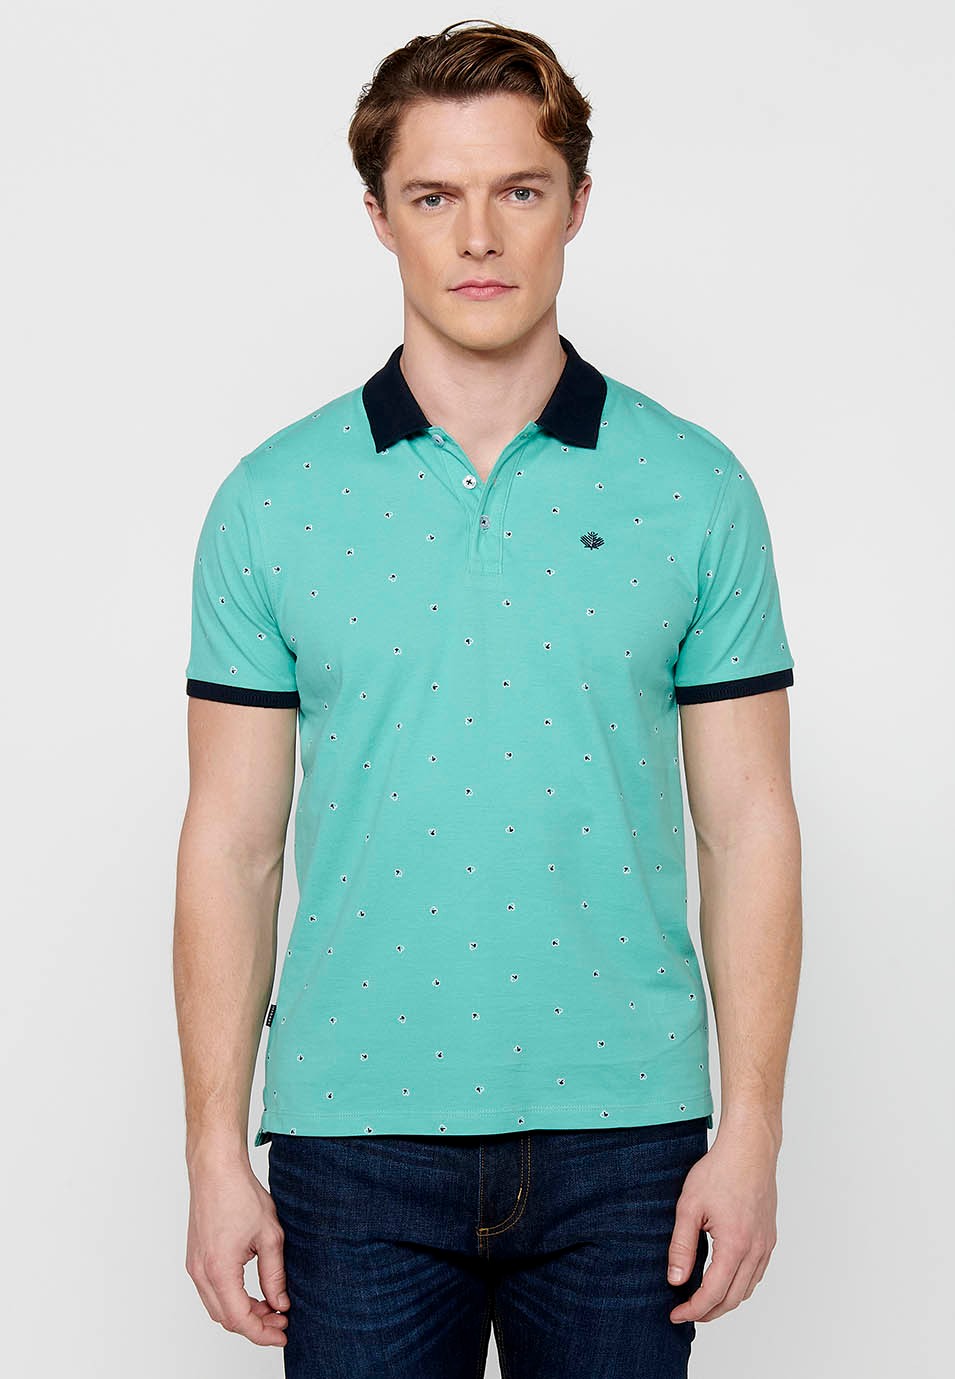 Men's mint printed cotton short-sleeved polo shirt 1